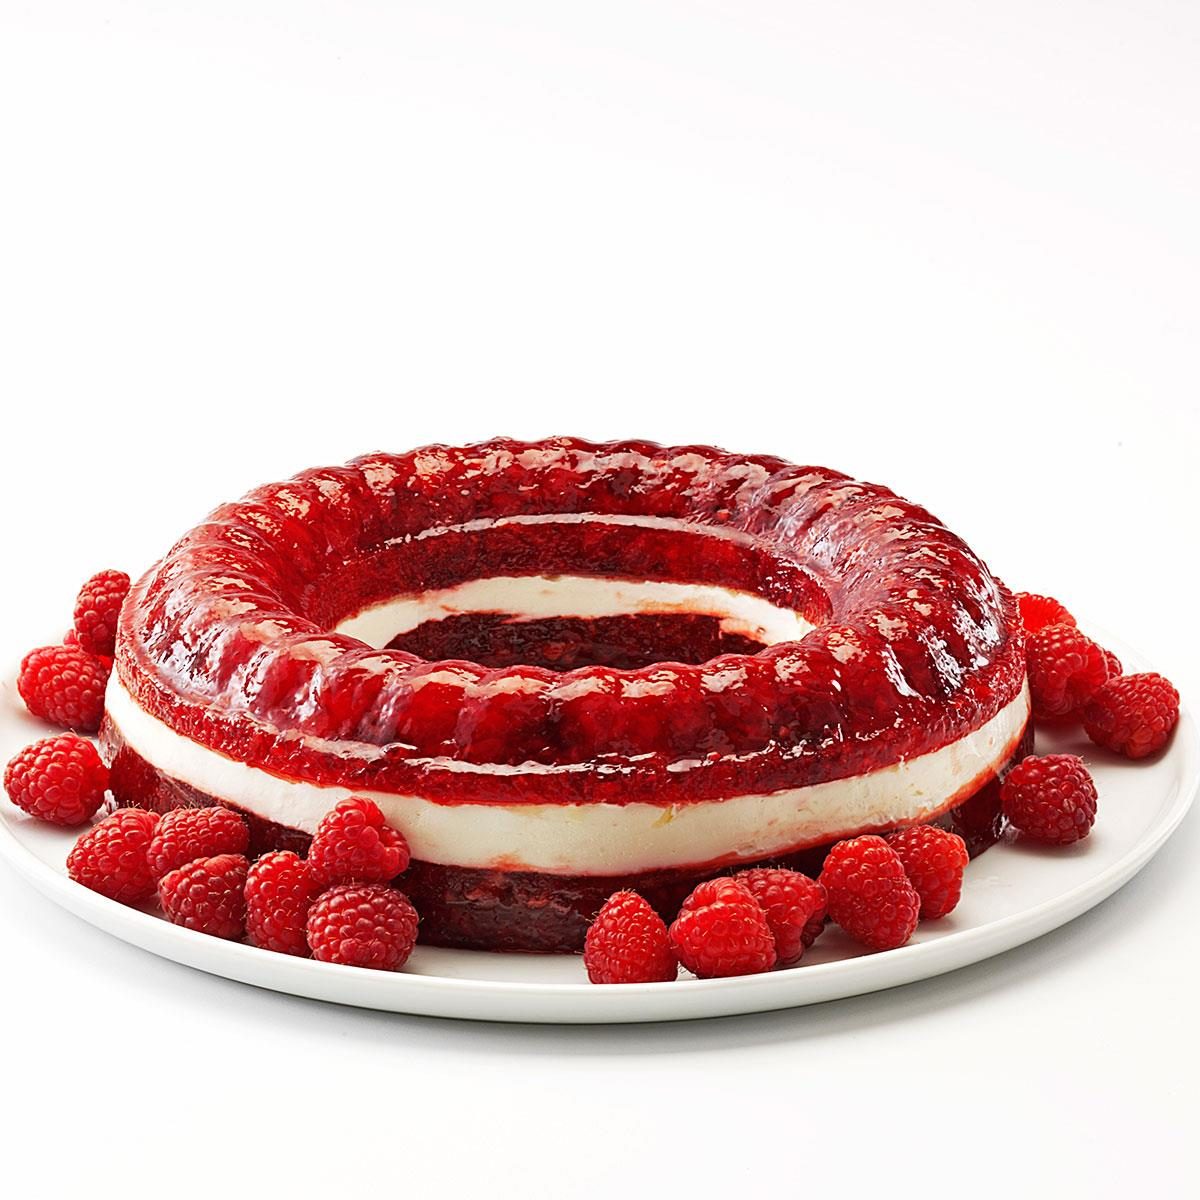 https://www.tasteofhome.com/wp-content/uploads/2018/01/Raspberry-Gelatin-Ring_exps16213_TH132104A06_26_23b_RMS.jpg?fit=700%2C1024